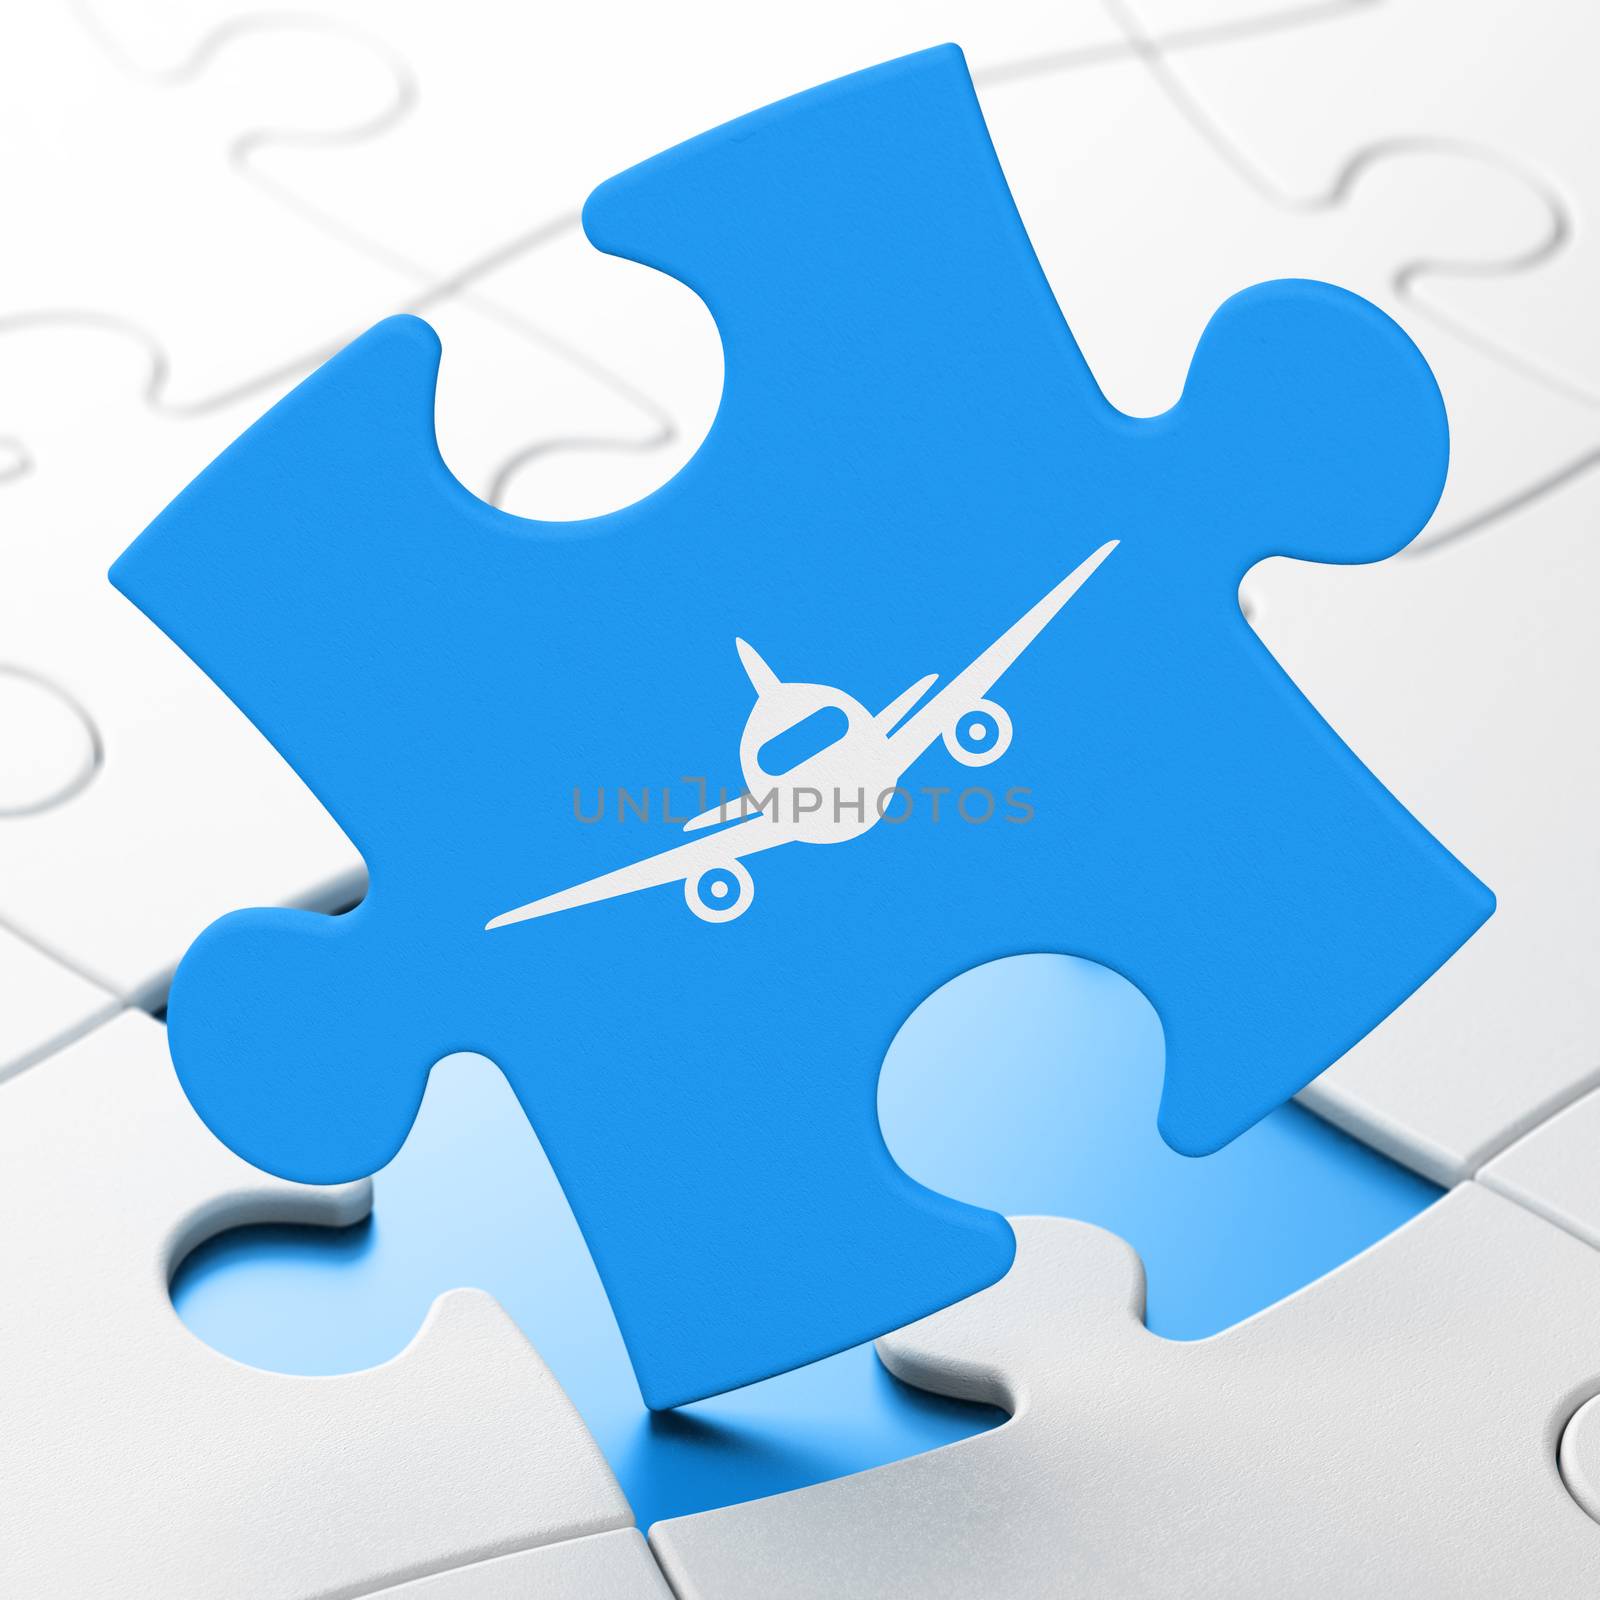 Travel concept: Aircraft on Blue puzzle pieces background, 3D rendering